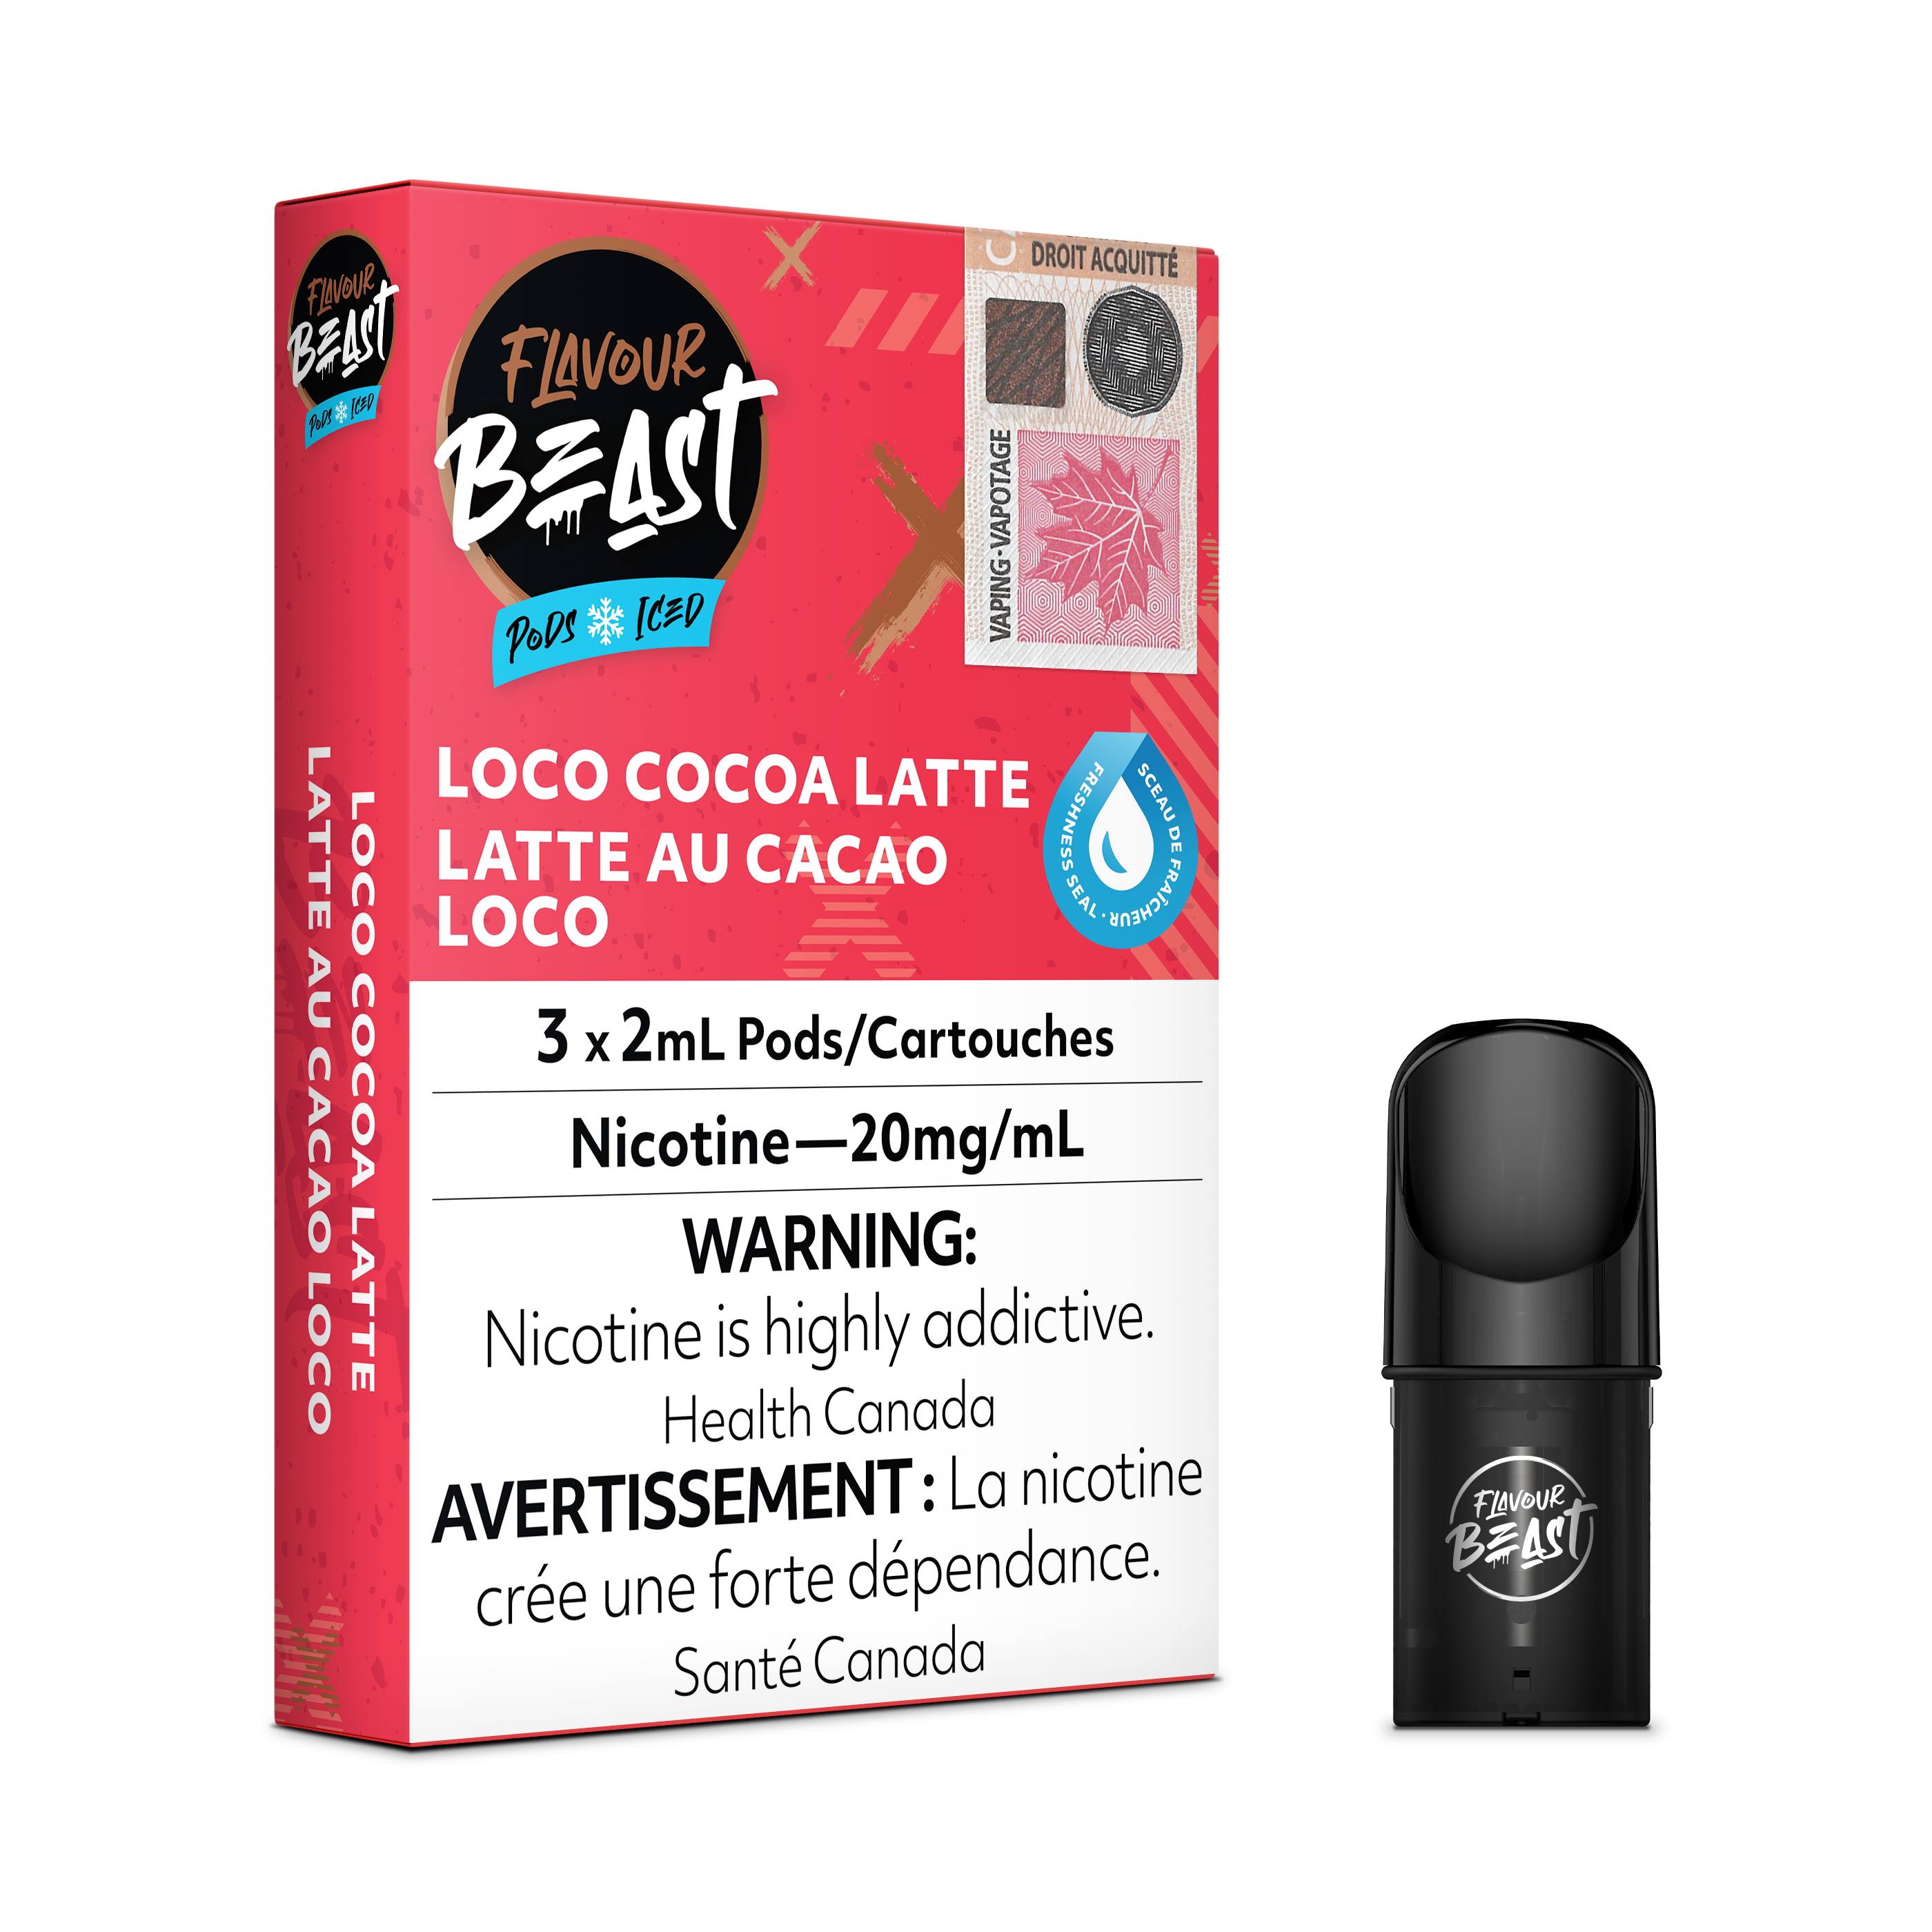 Loco Cocoa Latte - Flavour Beast Pod Pack - 20mg - EXCISED